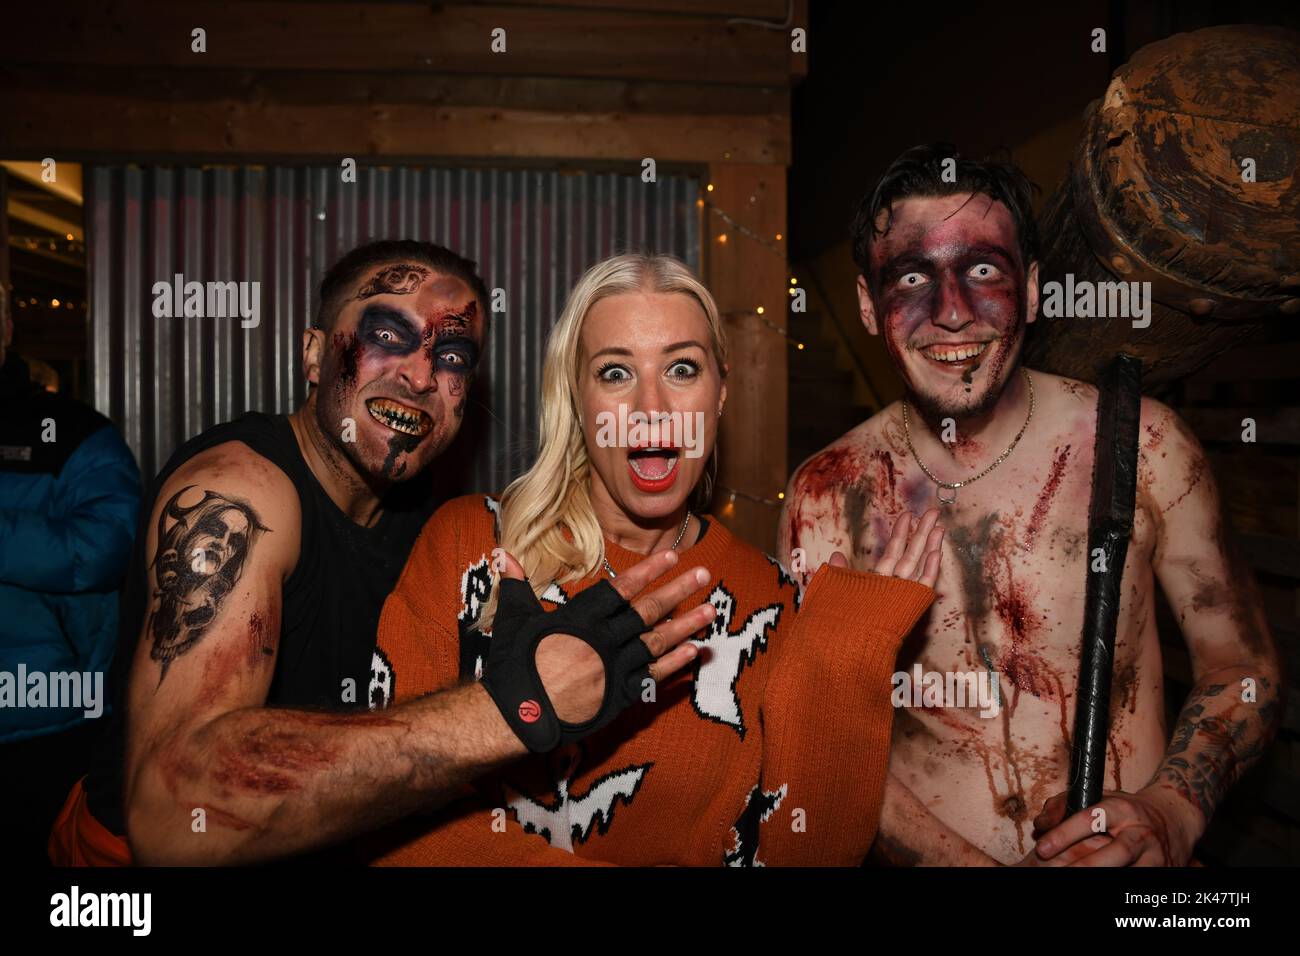 Crawley, UK. Friday 30 September 2022. Denise Van Outen and other Celebrities brave the scares at Tulleys Shocktober Fest VIP launch night. Credit: Thomas Faull/Alamy Live News Stock Photo